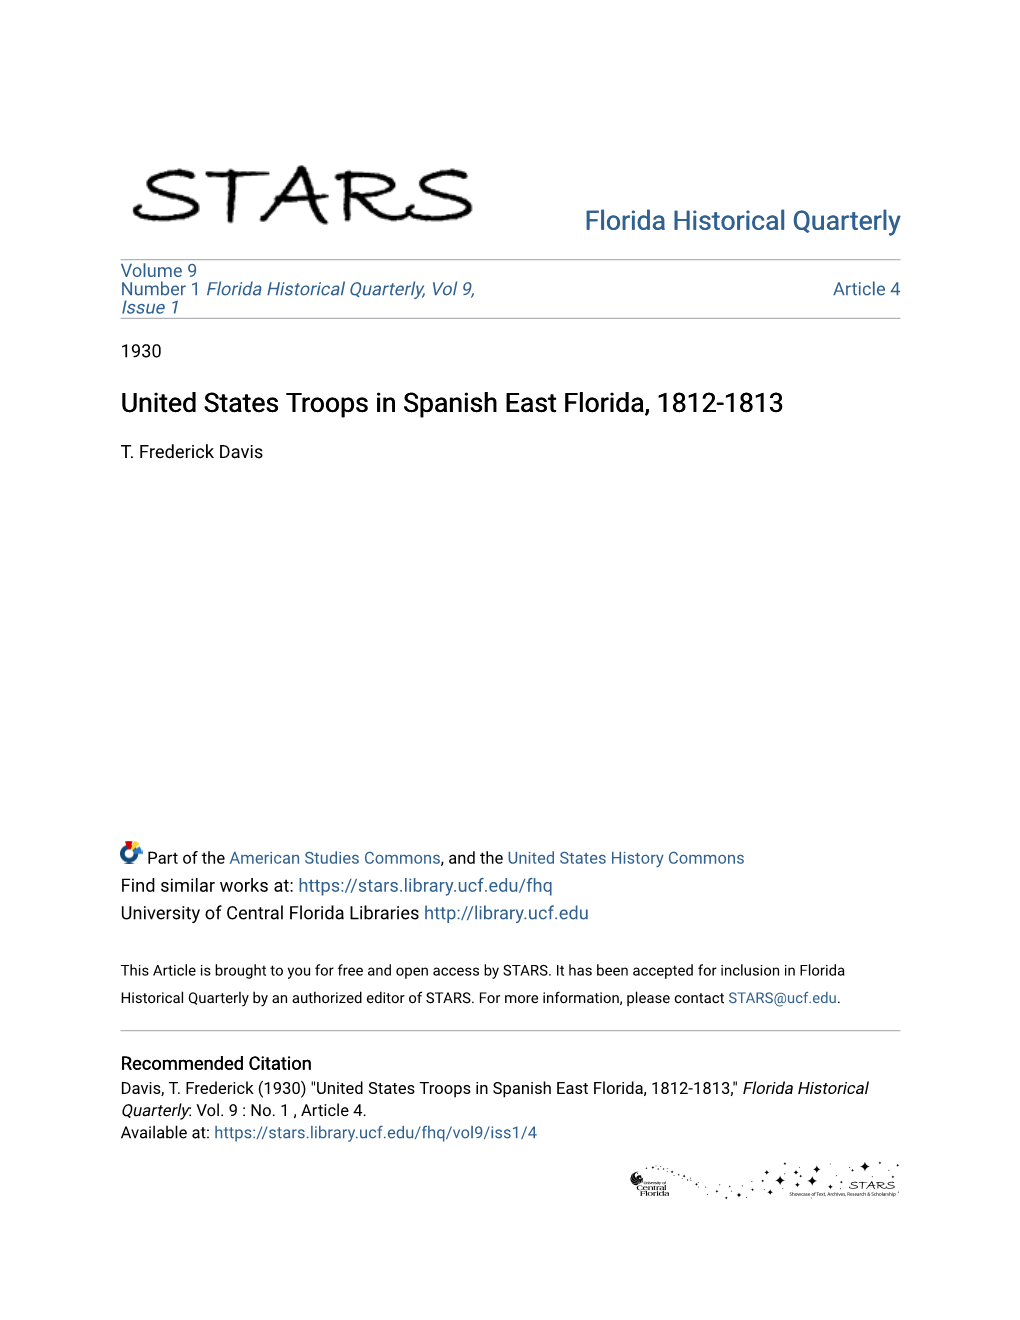 United States Troops in Spanish East Florida, 1812-1813